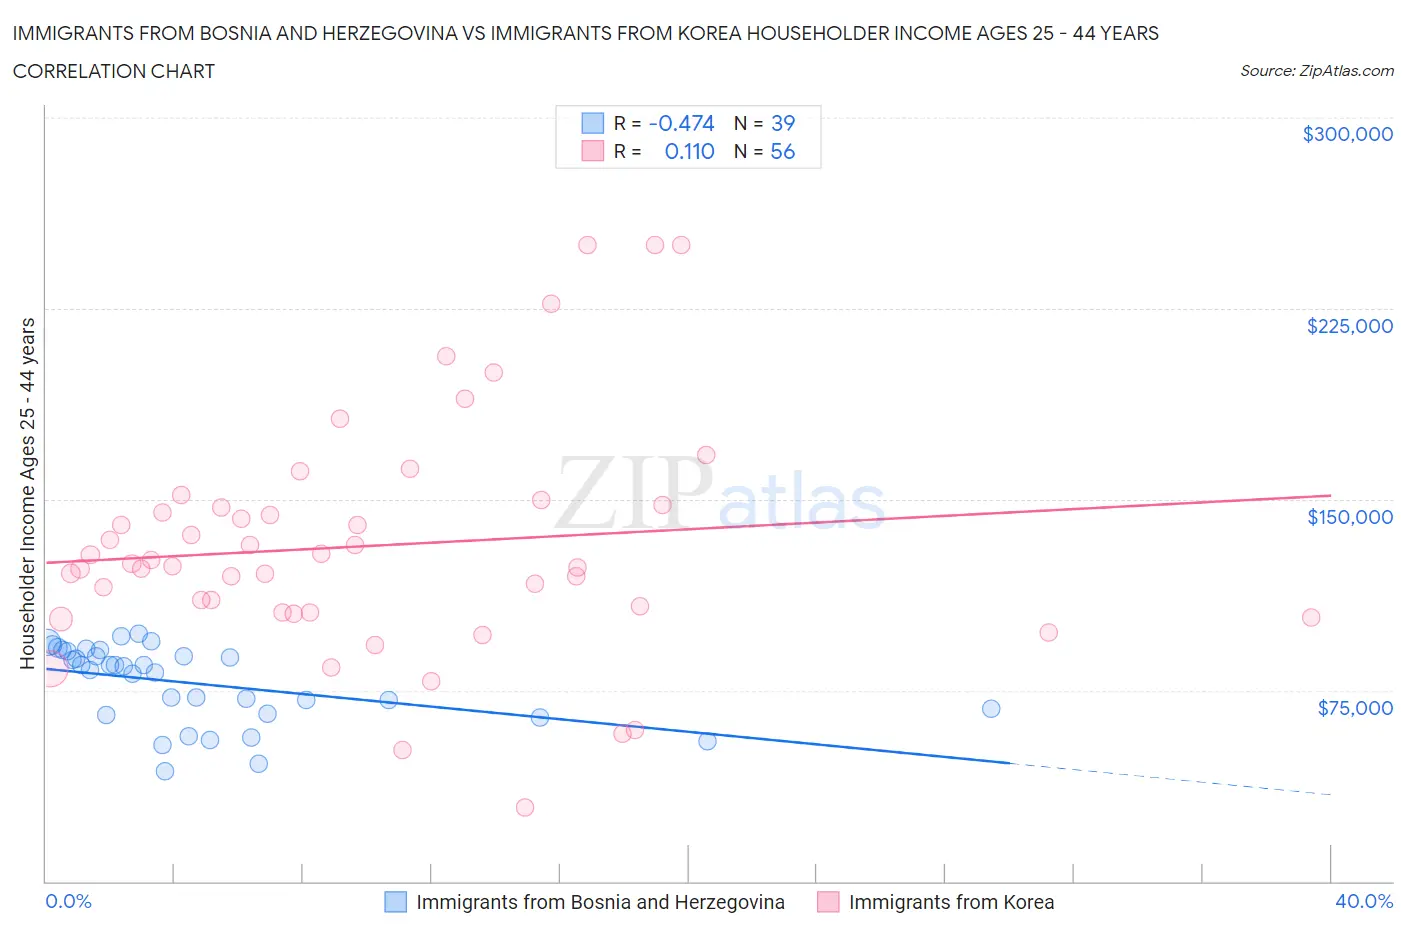 Immigrants from Bosnia and Herzegovina vs Immigrants from Korea Householder Income Ages 25 - 44 years